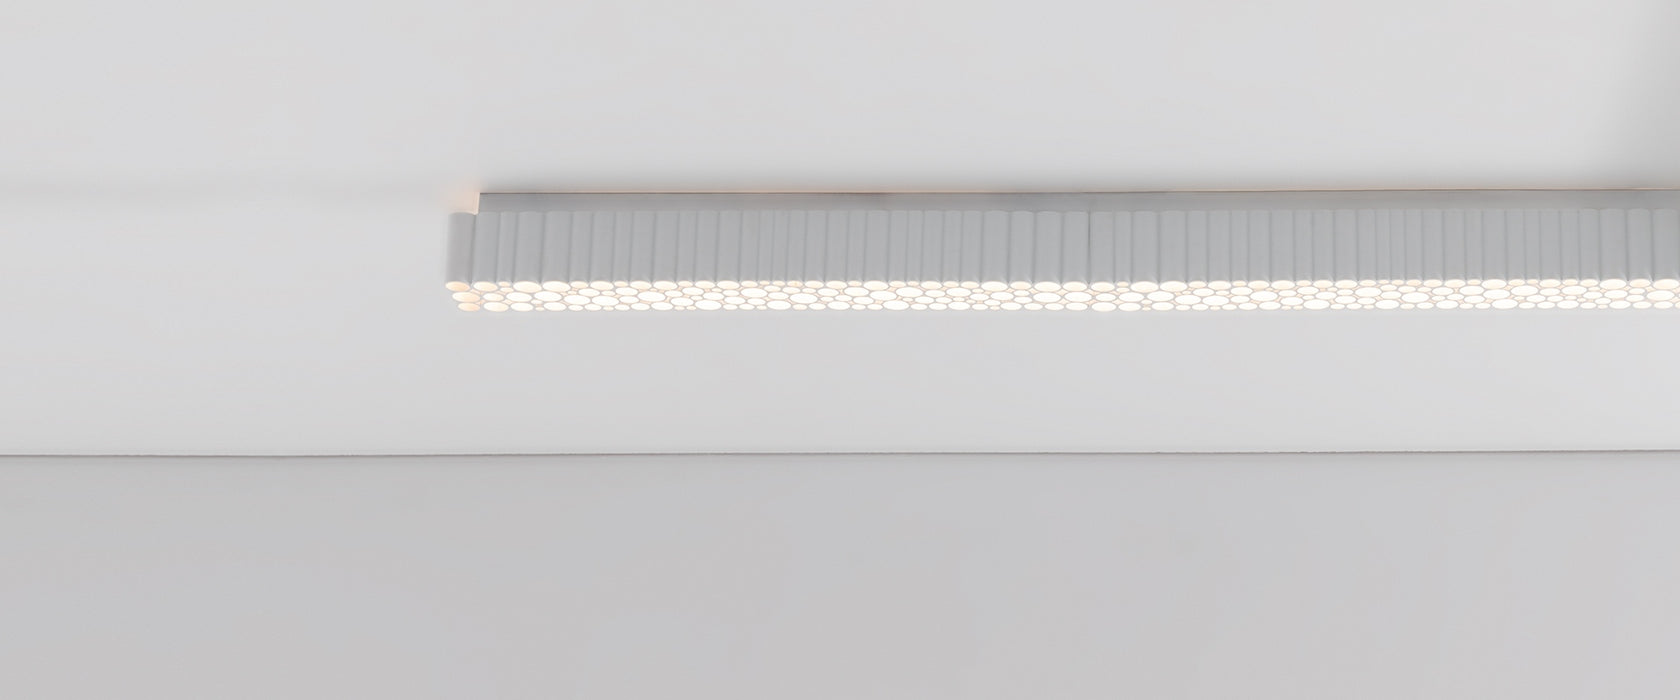 CALIPSO LINEAR 120 STANDALONE CEILING